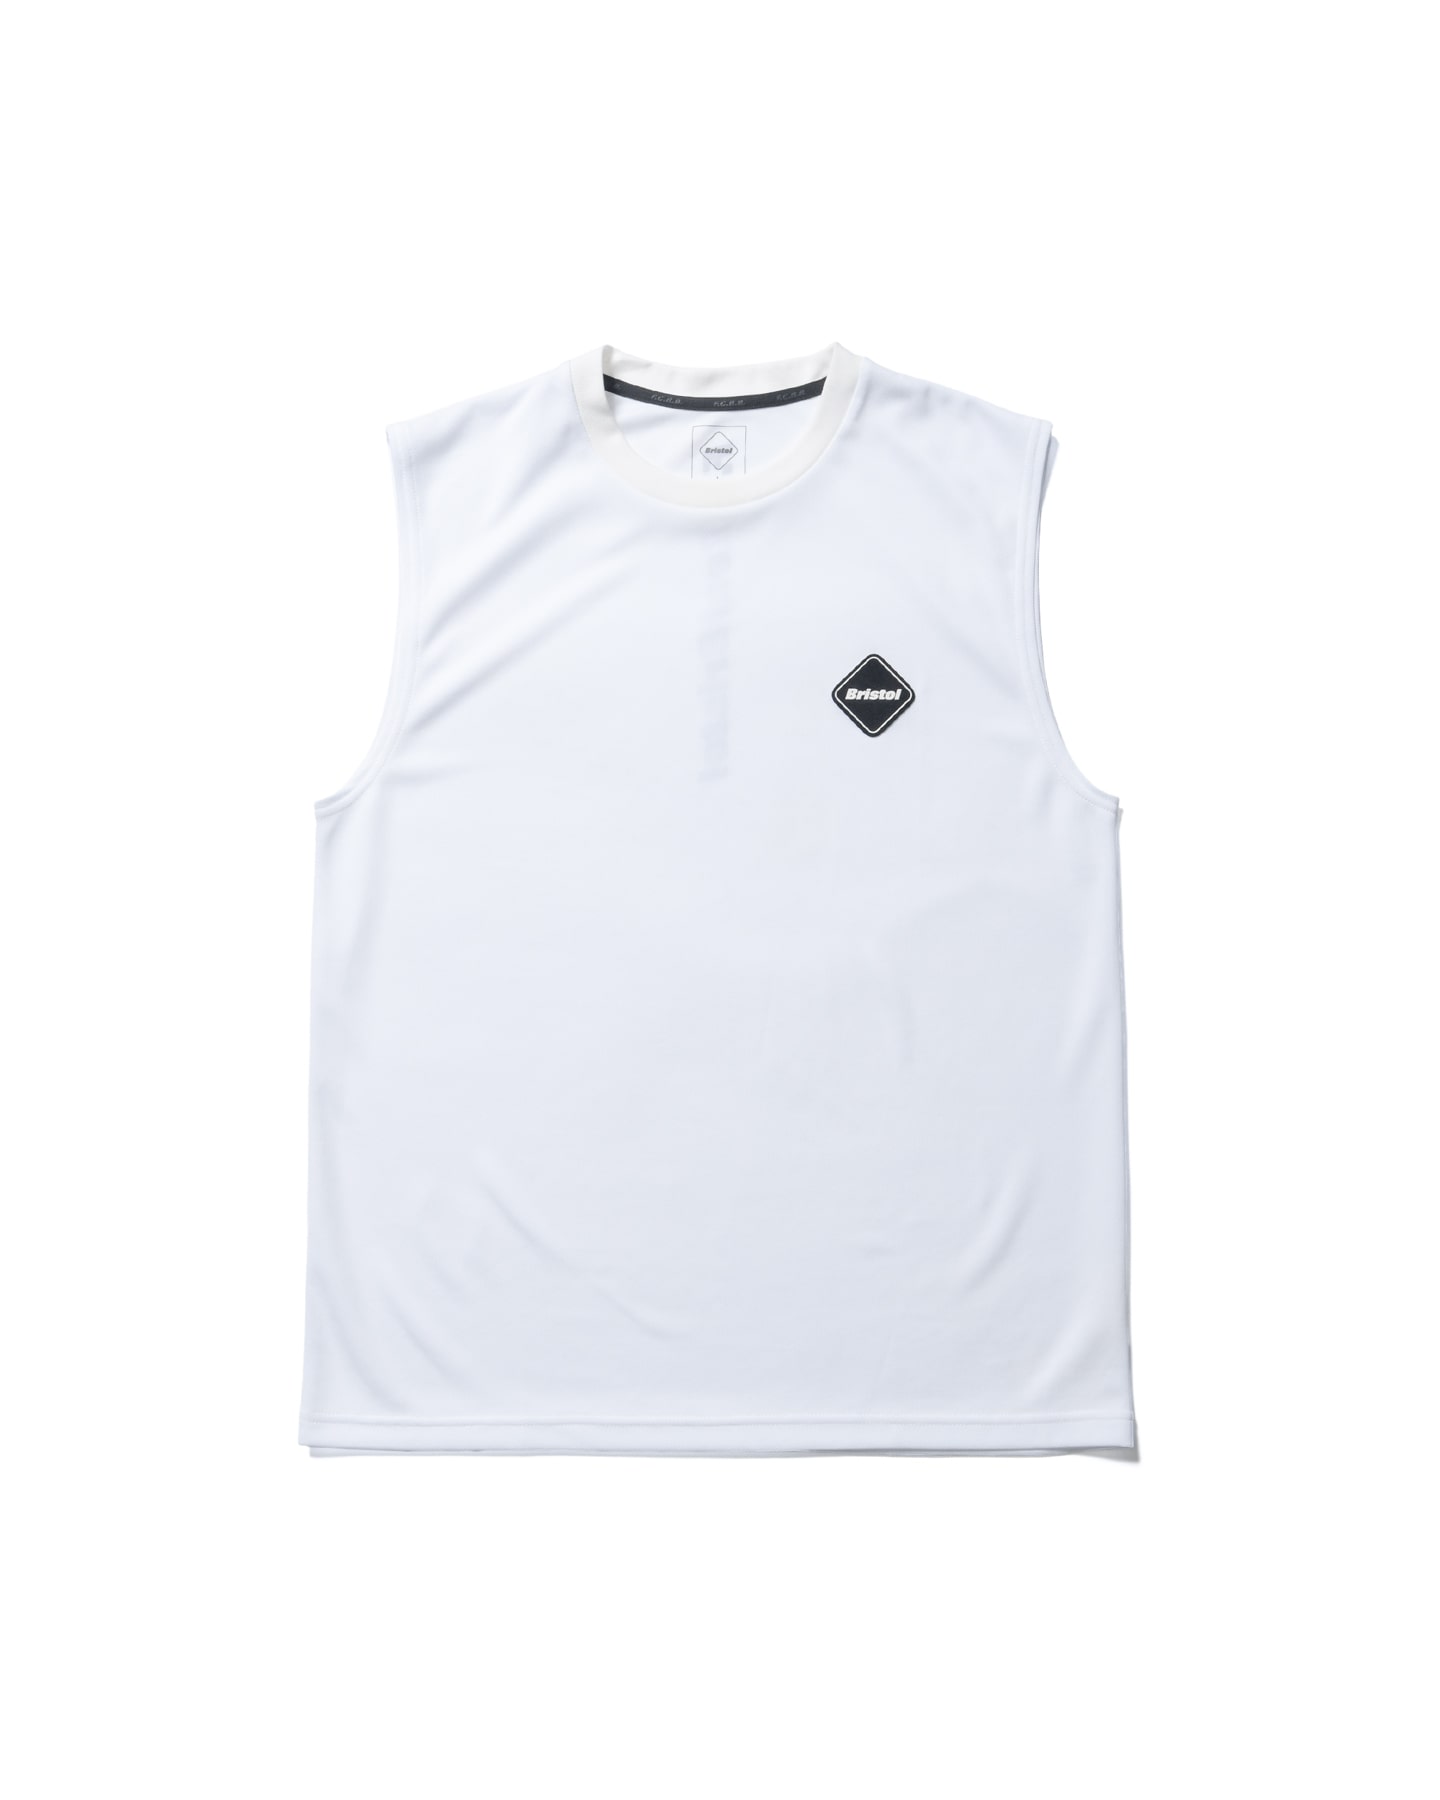 SOPH. | NO SLEEVE TRAINING TOP(S WHITE):